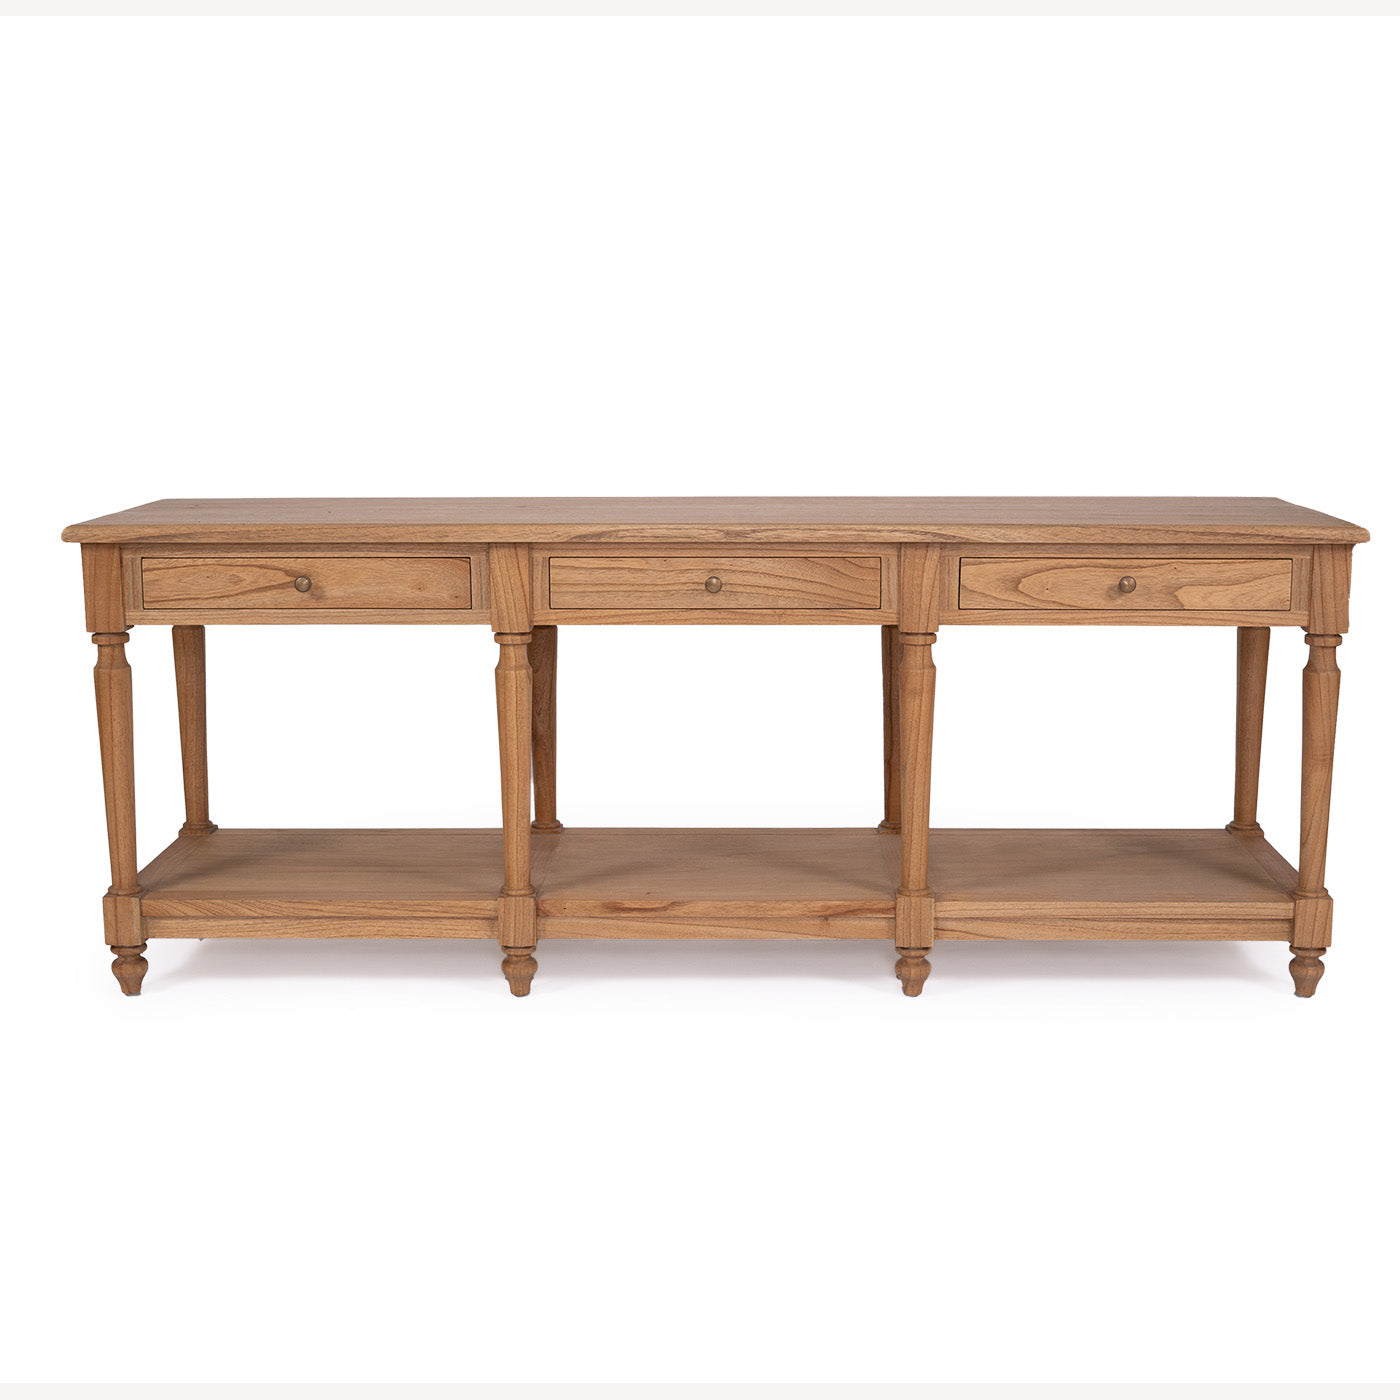 Herose Wooden Console Table With 3 Drawer - 200cm - Notbrand